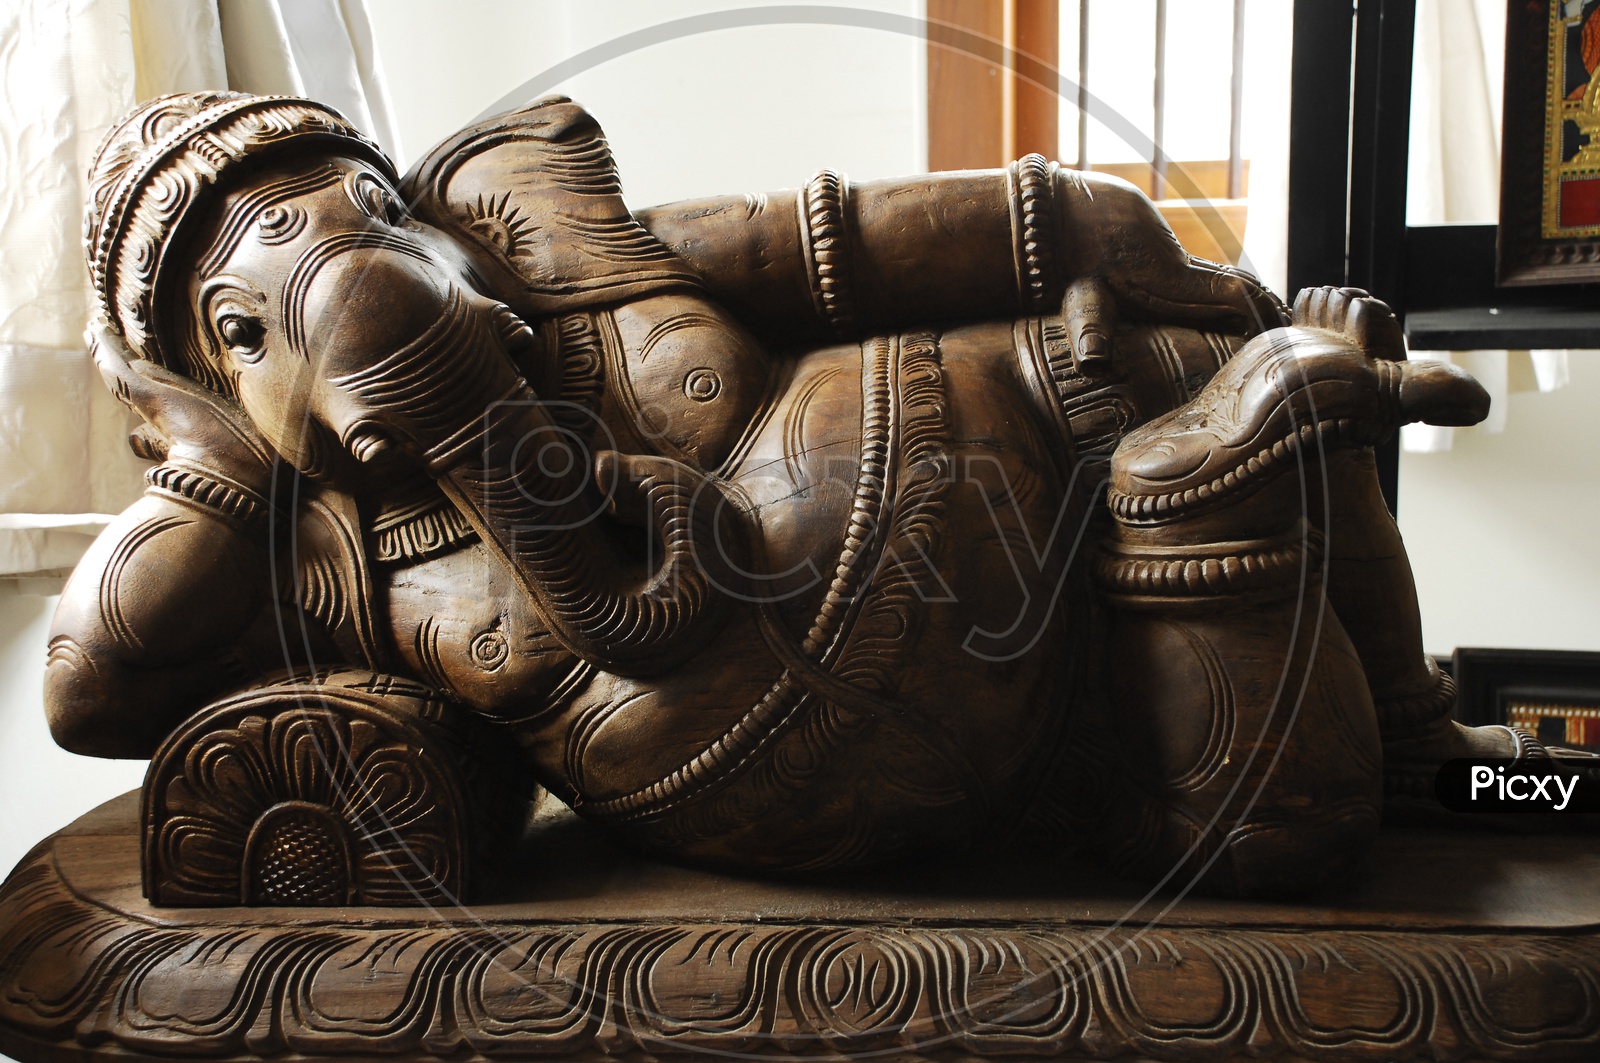 Wooden Carved Lord Ganesh Idol